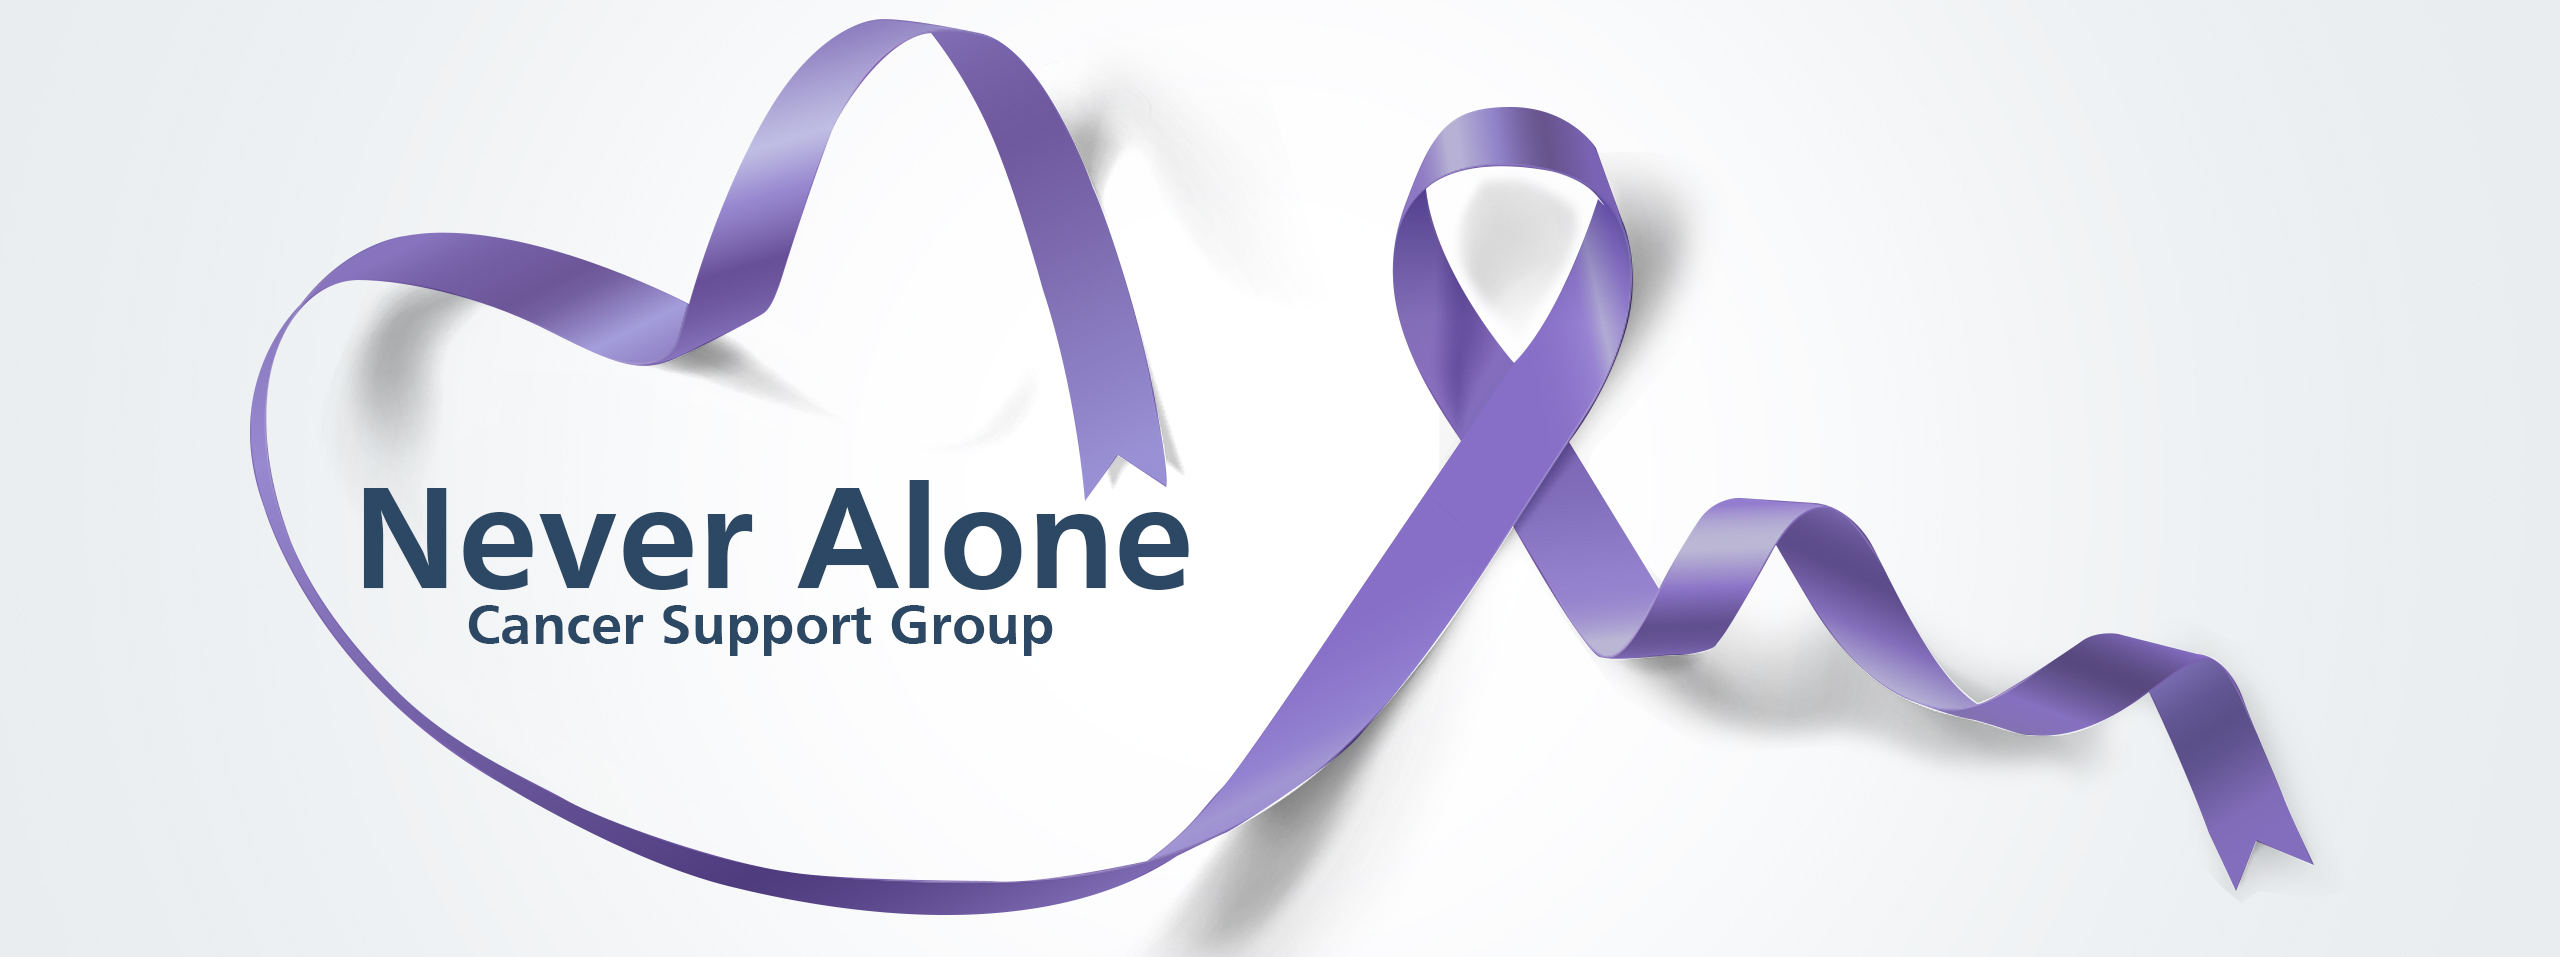 Cancer Support Group 1